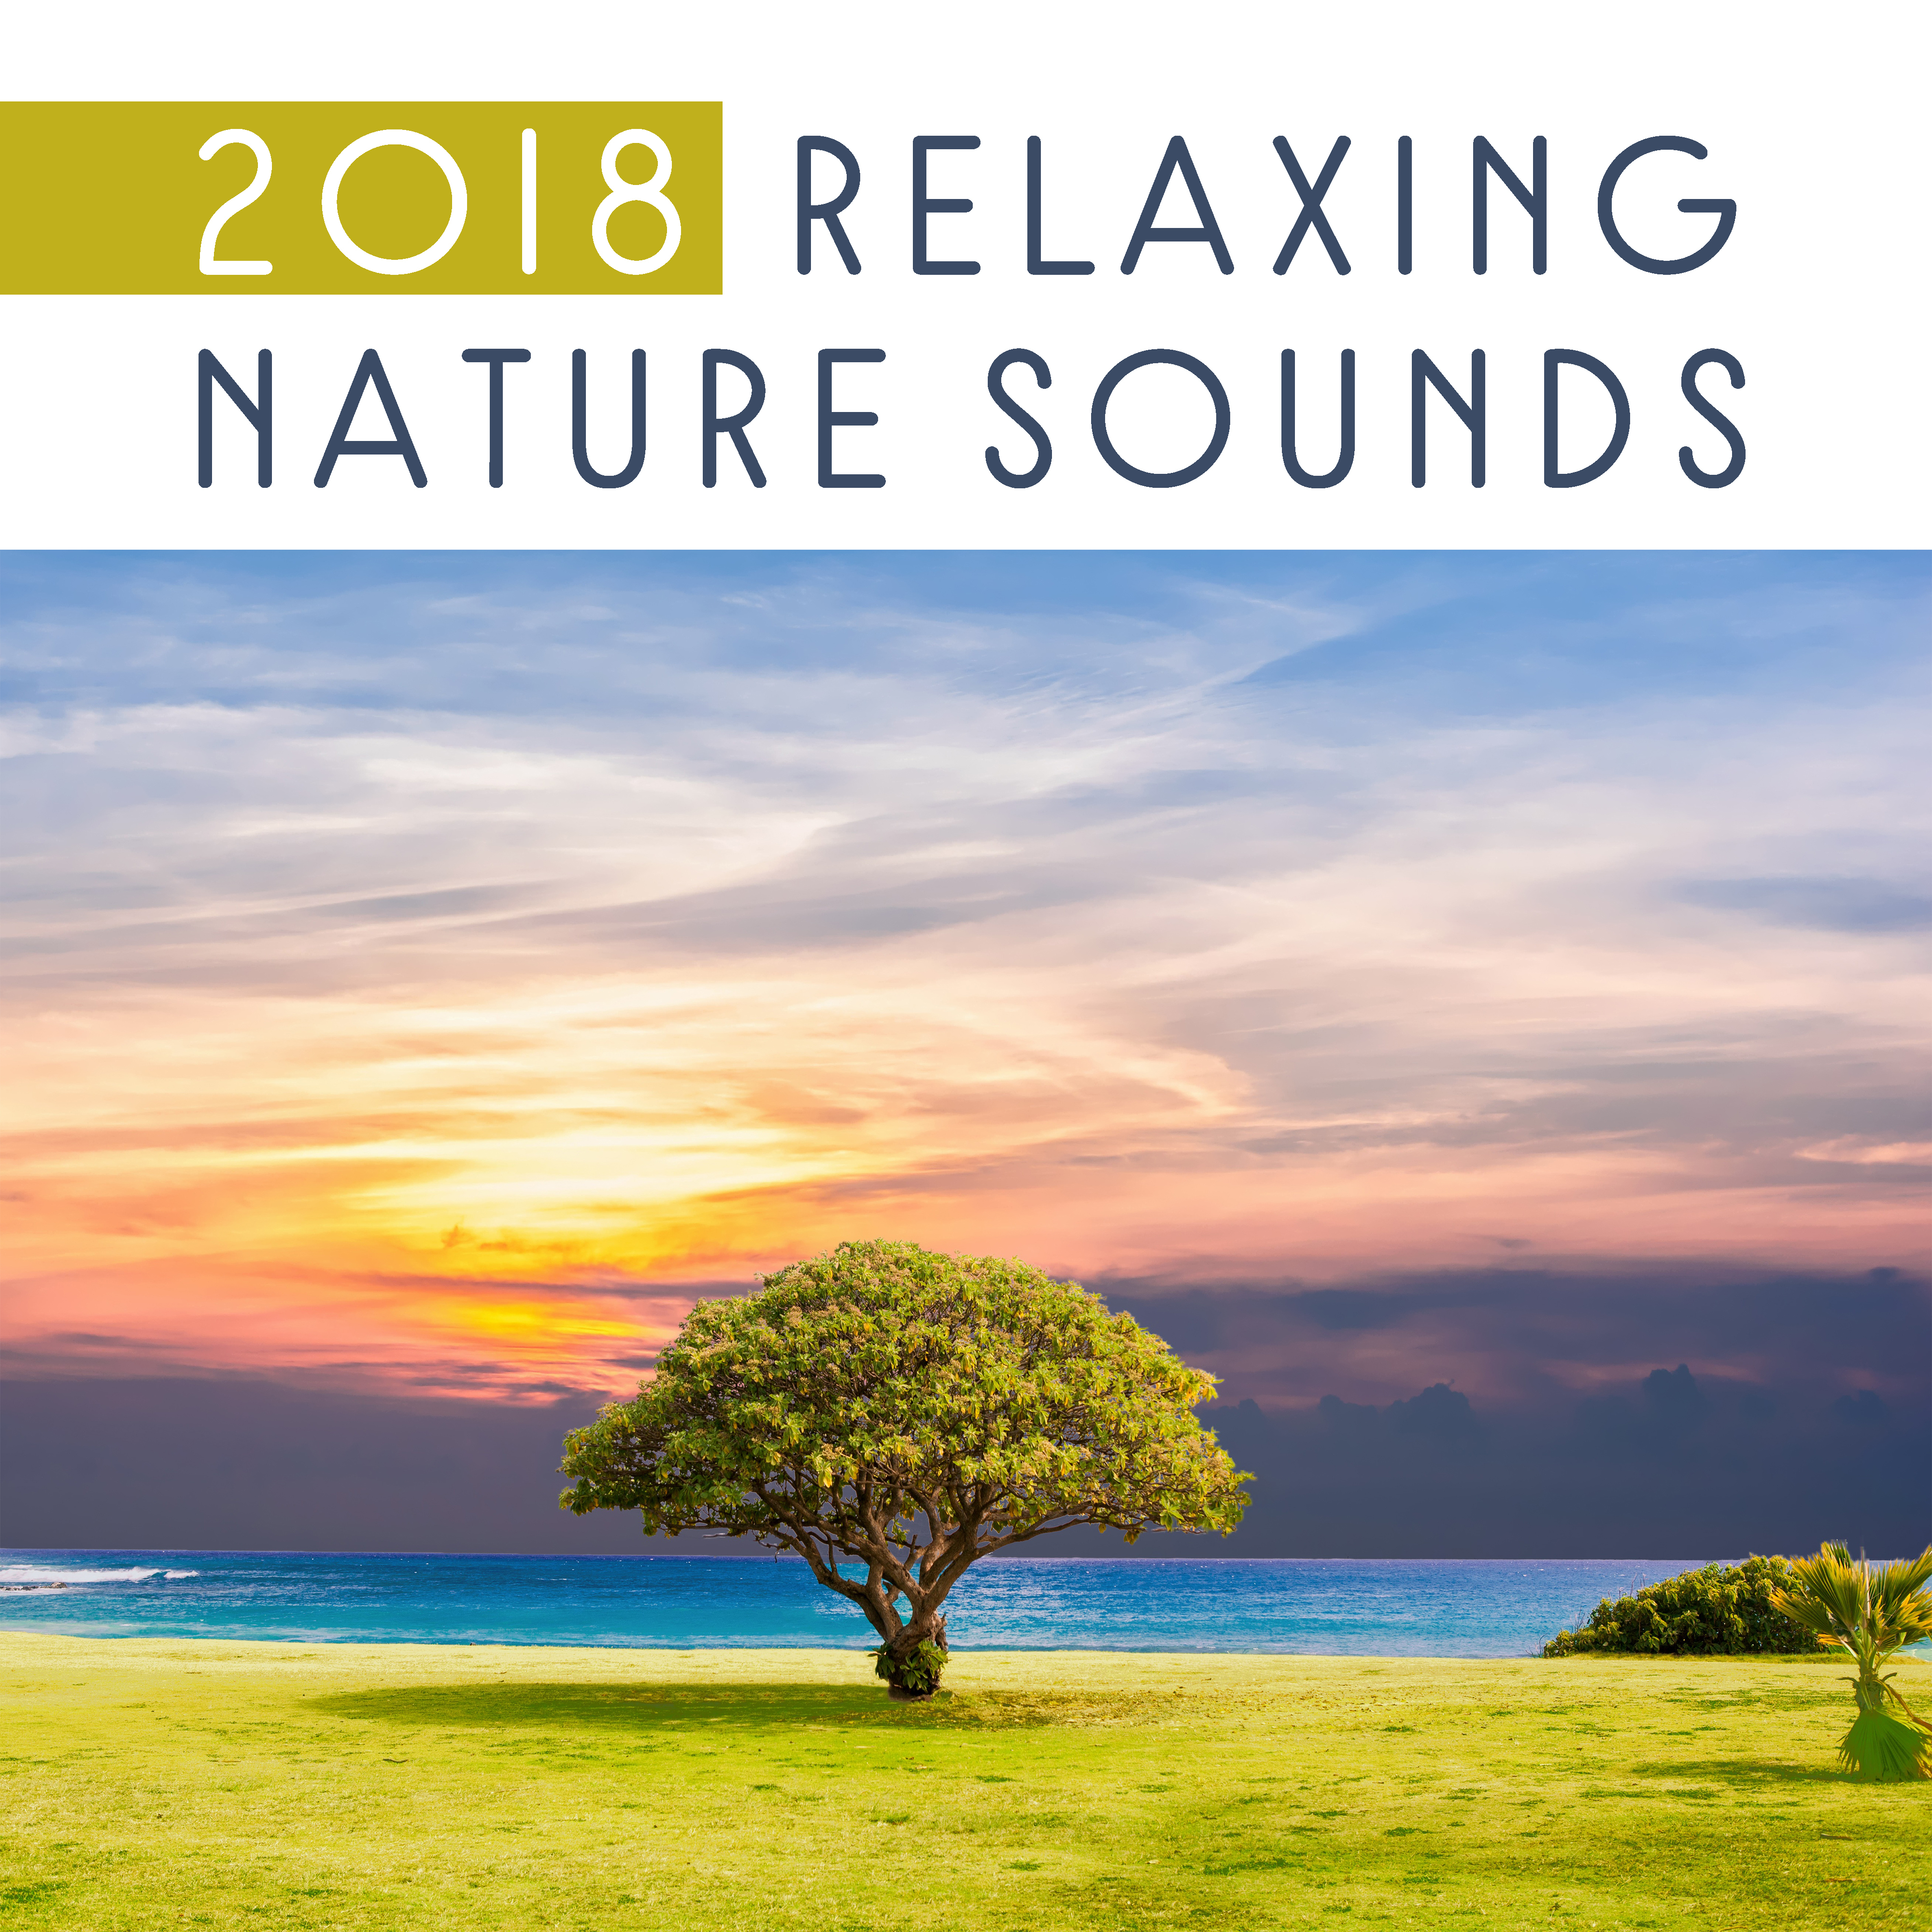 2018 Relaxing Nature Sounds